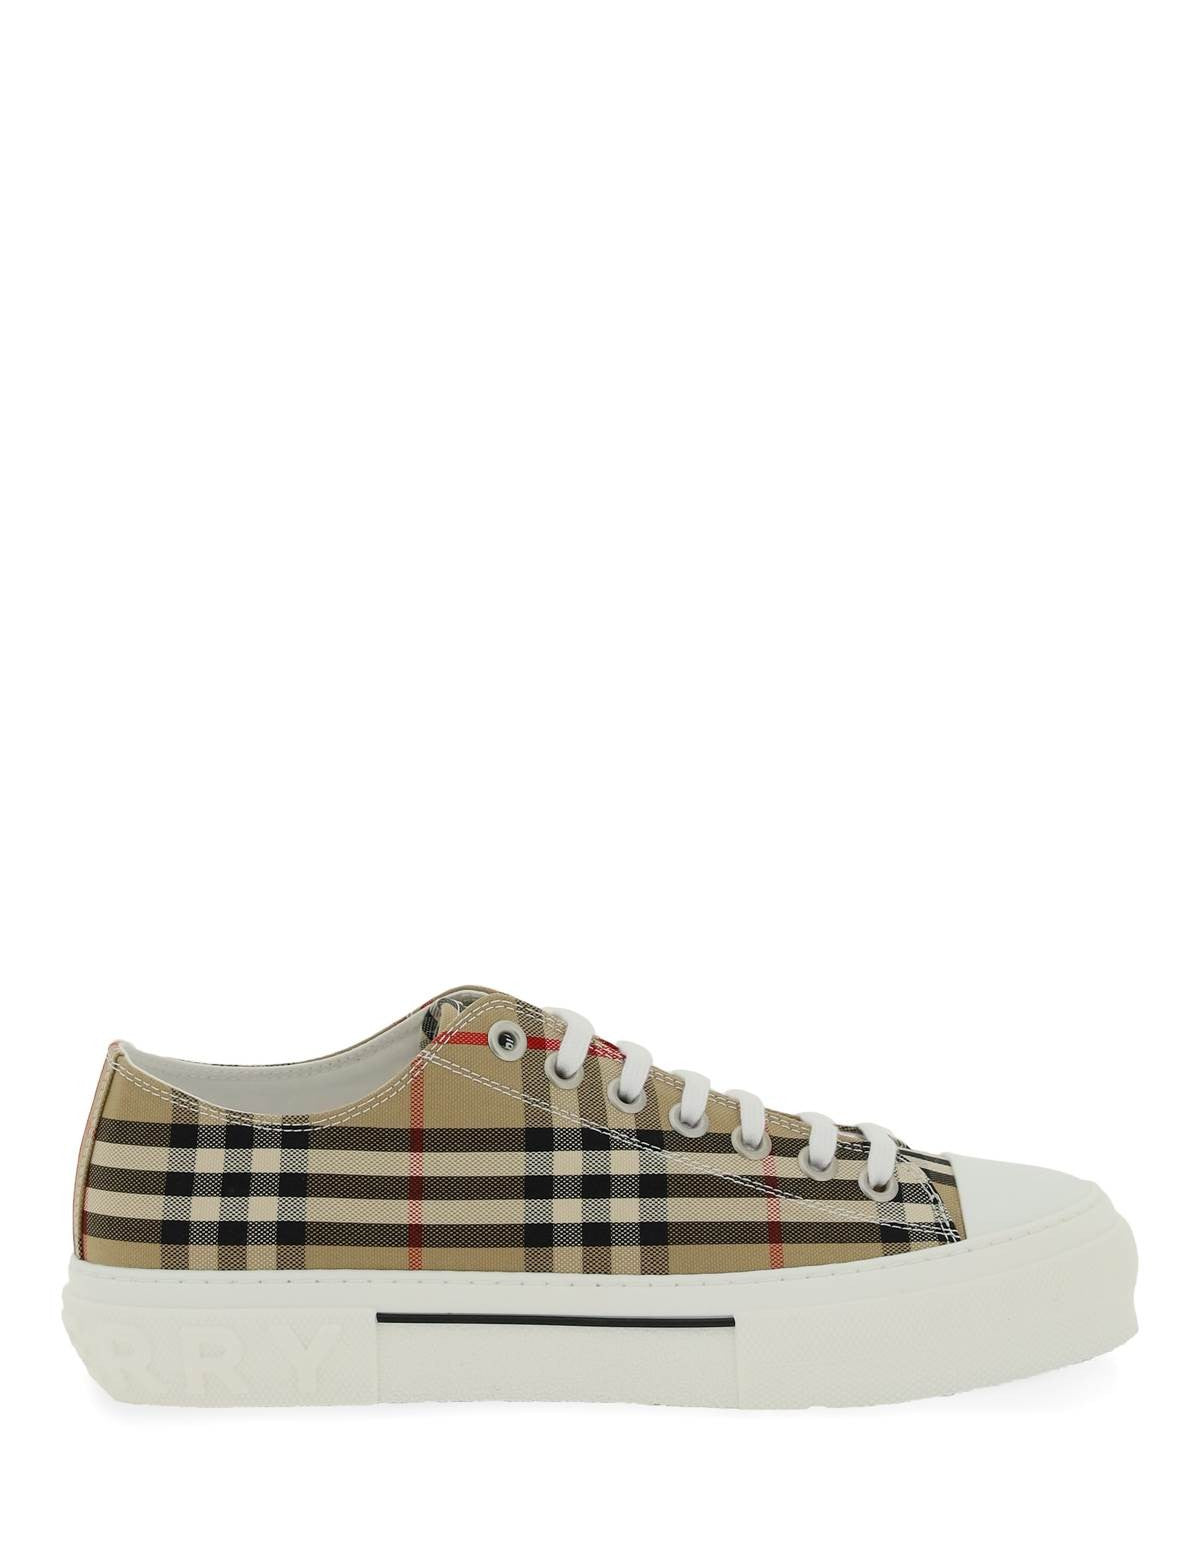 burberry-vintage-check-canvas-sneakers.jpg